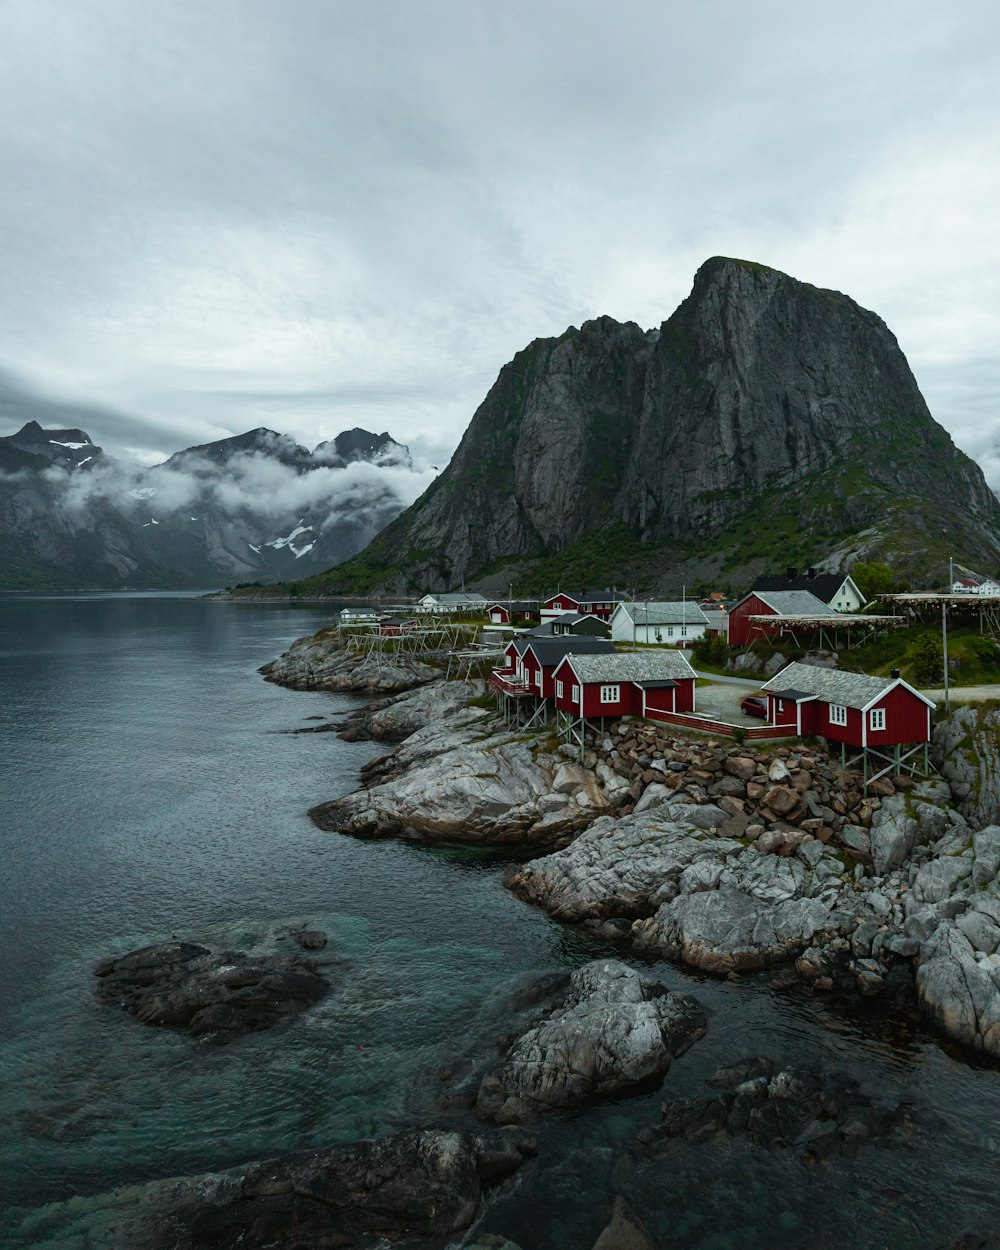 a group of houses by a body of water with mountains in the background